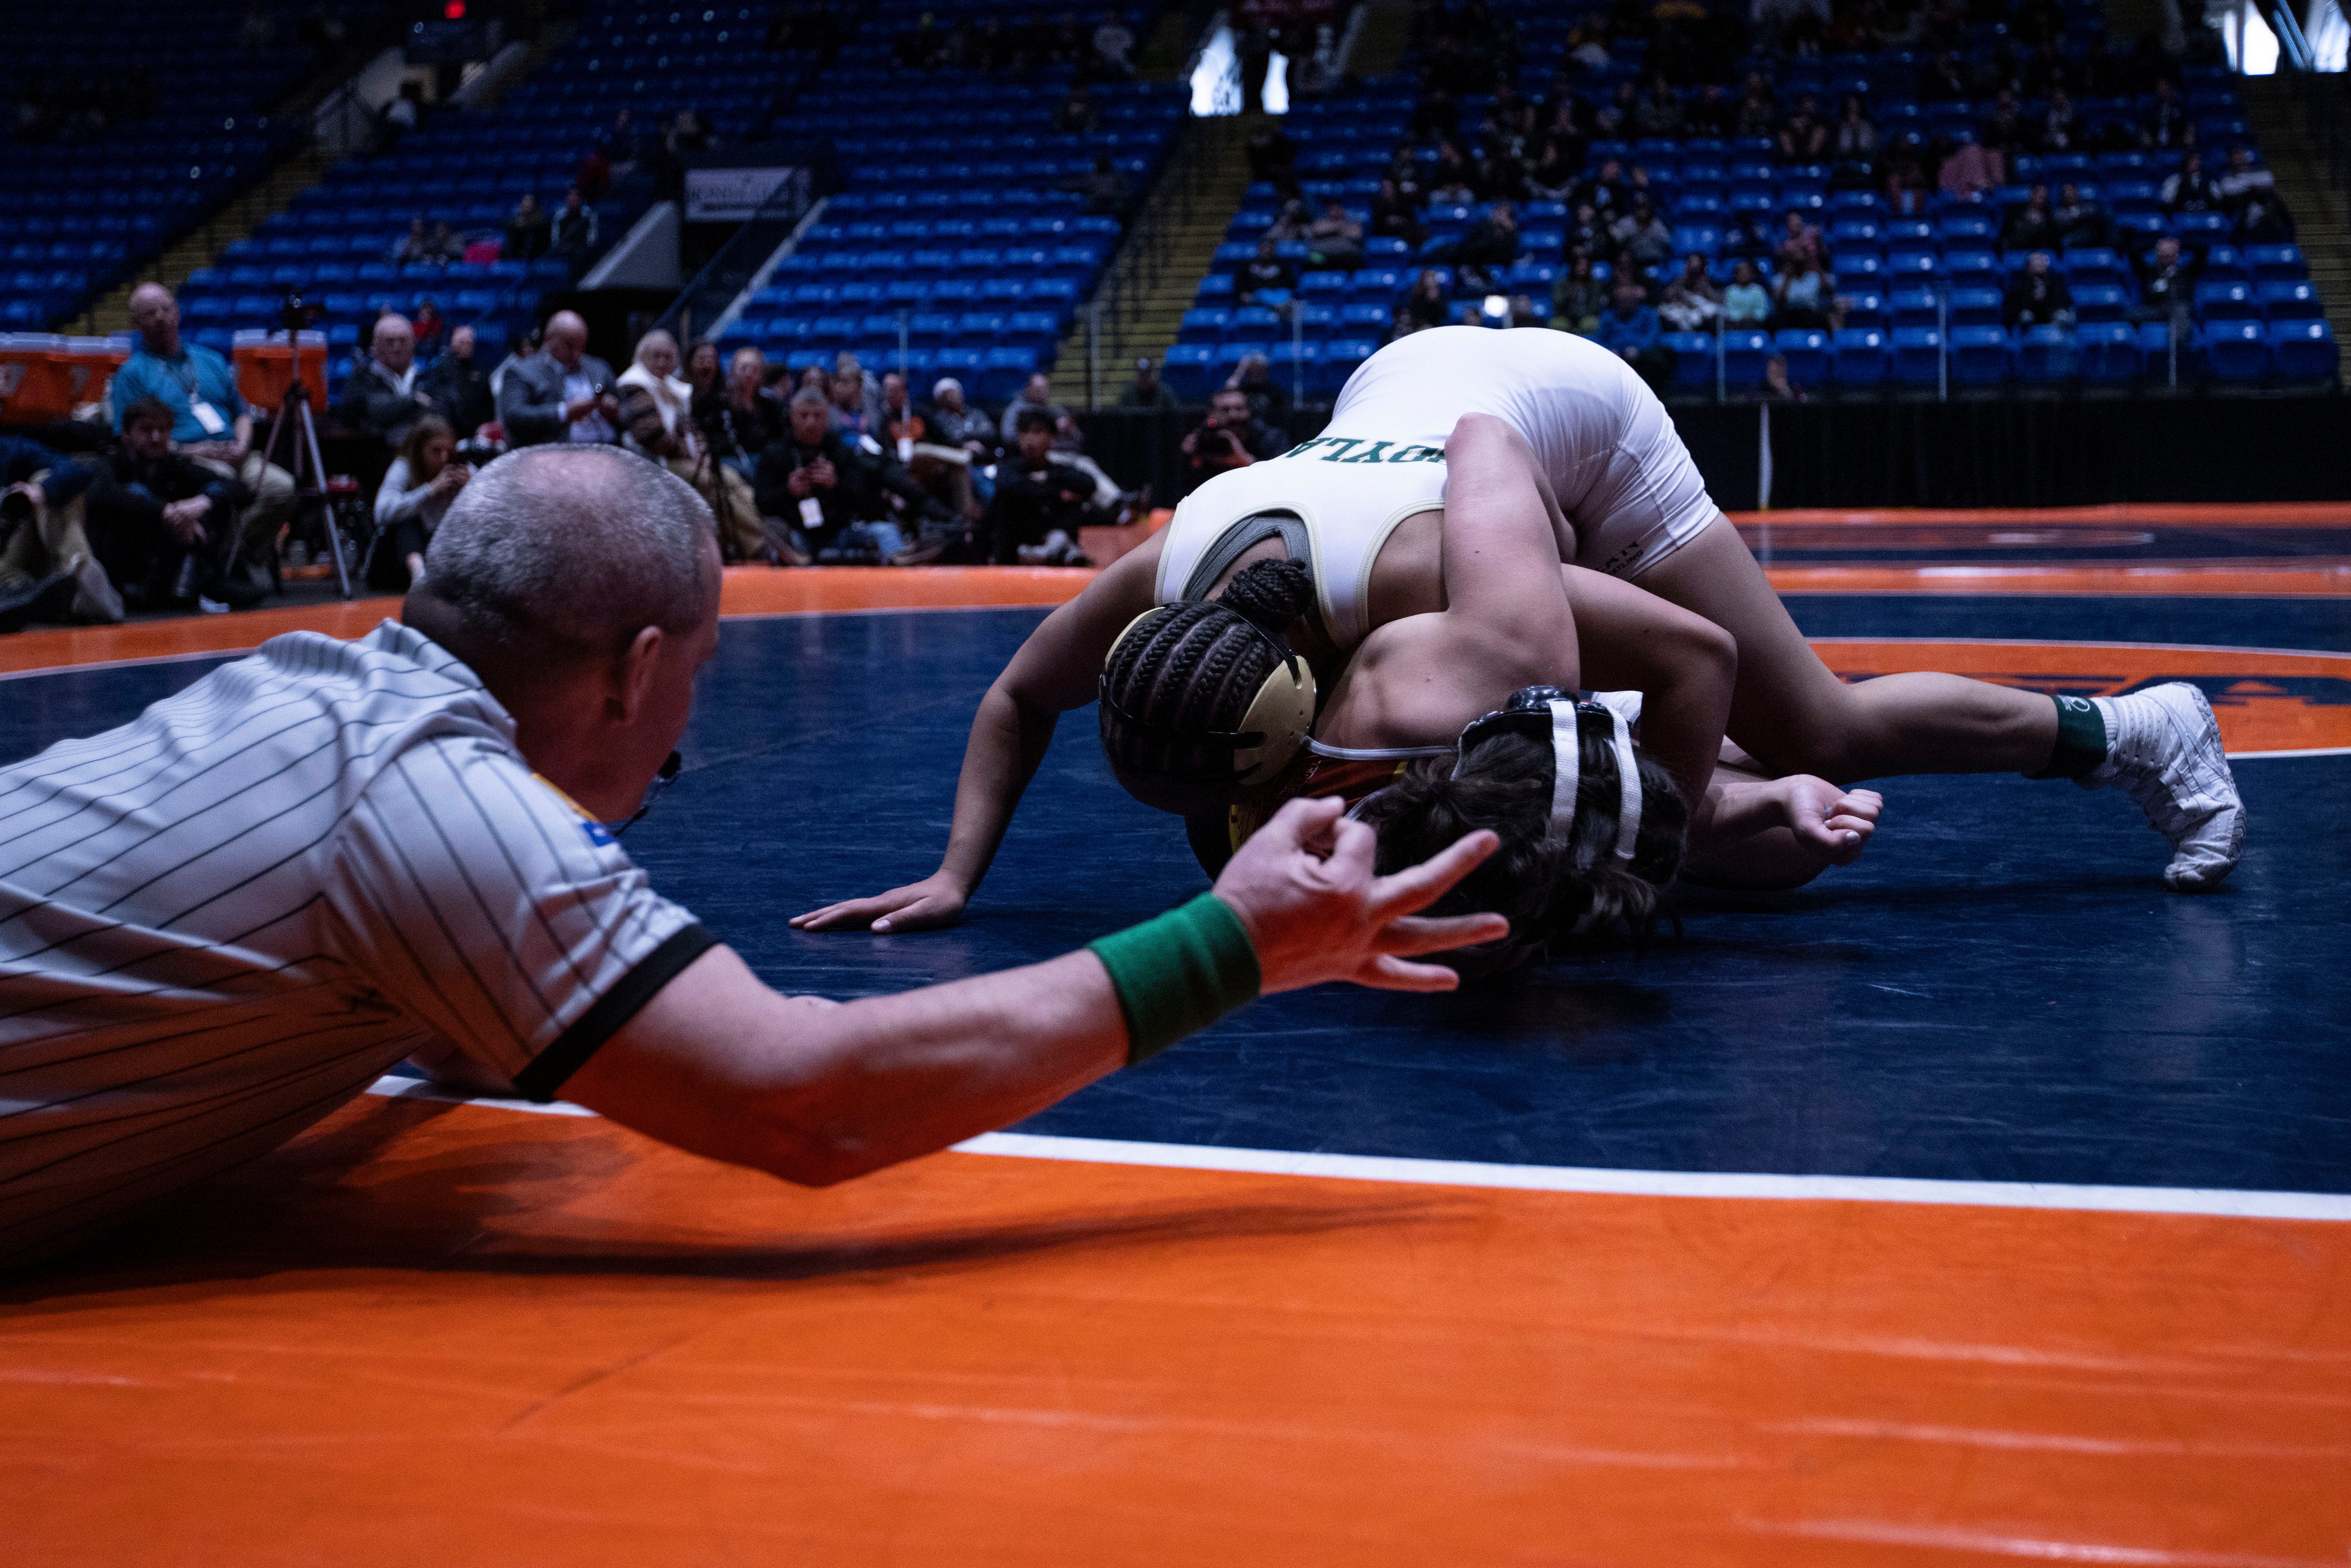 High school wrestling adopts some new rules, copying college's most recent changes